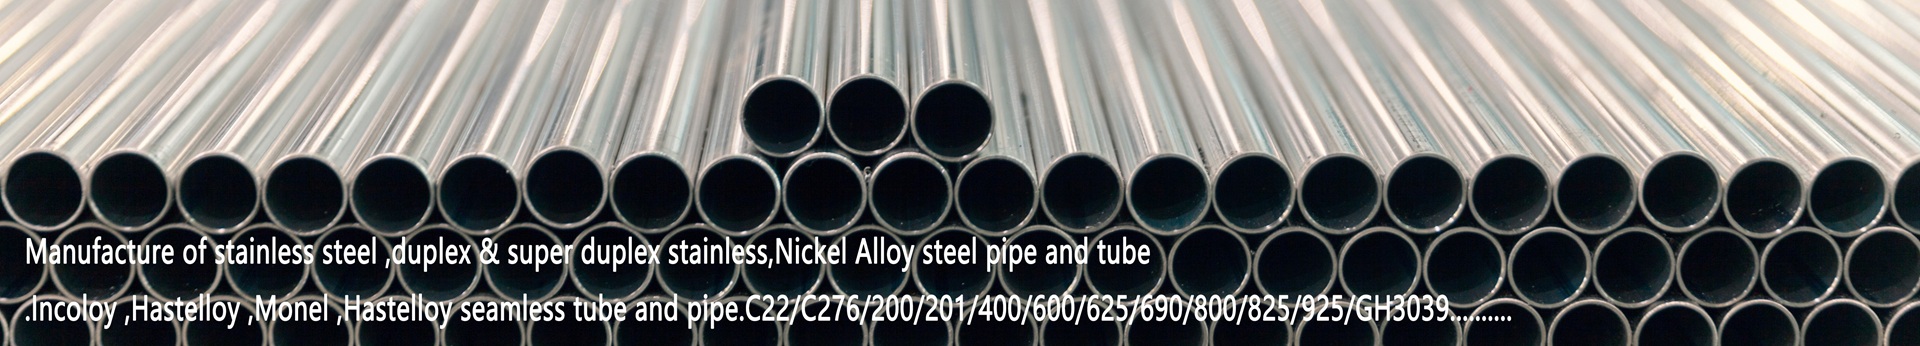 Manufacture of stainless steel ,duplex & super duplex stainless,Nickel Alloy steel pipe and tube.Incoloy ,Hastelloy ,Monel ,Hastelloy seamless tube and pipe.C22/C276/200/201/400/600/625/690/800/825/925/GH3039..........	